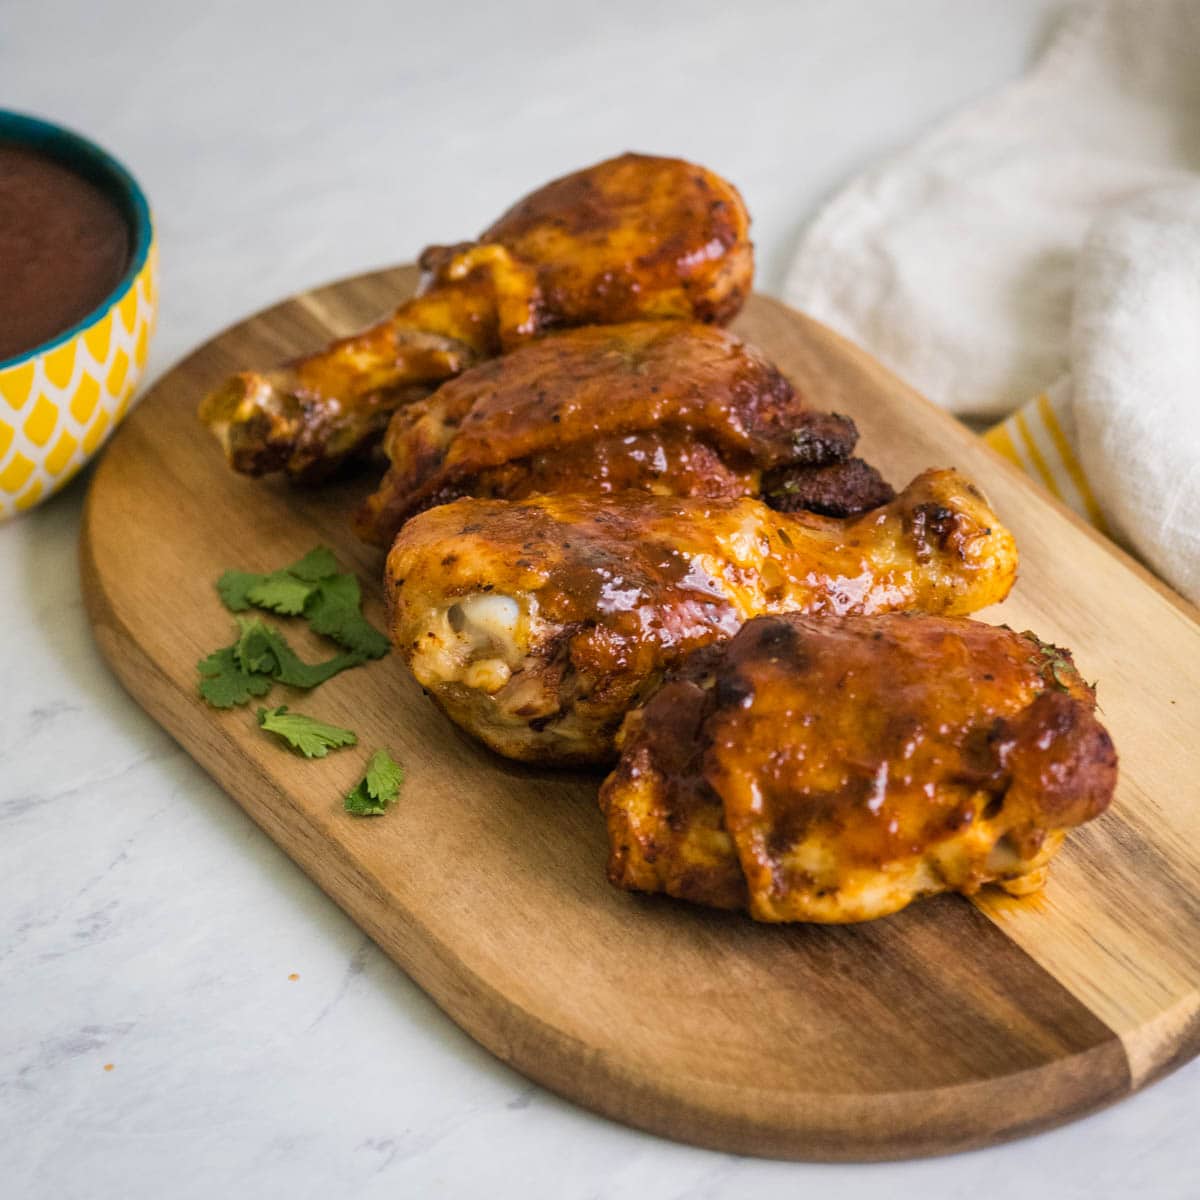 Chicken drumsticks and thighs coated with BBQ sauce on a wooden cutting board with herbs.